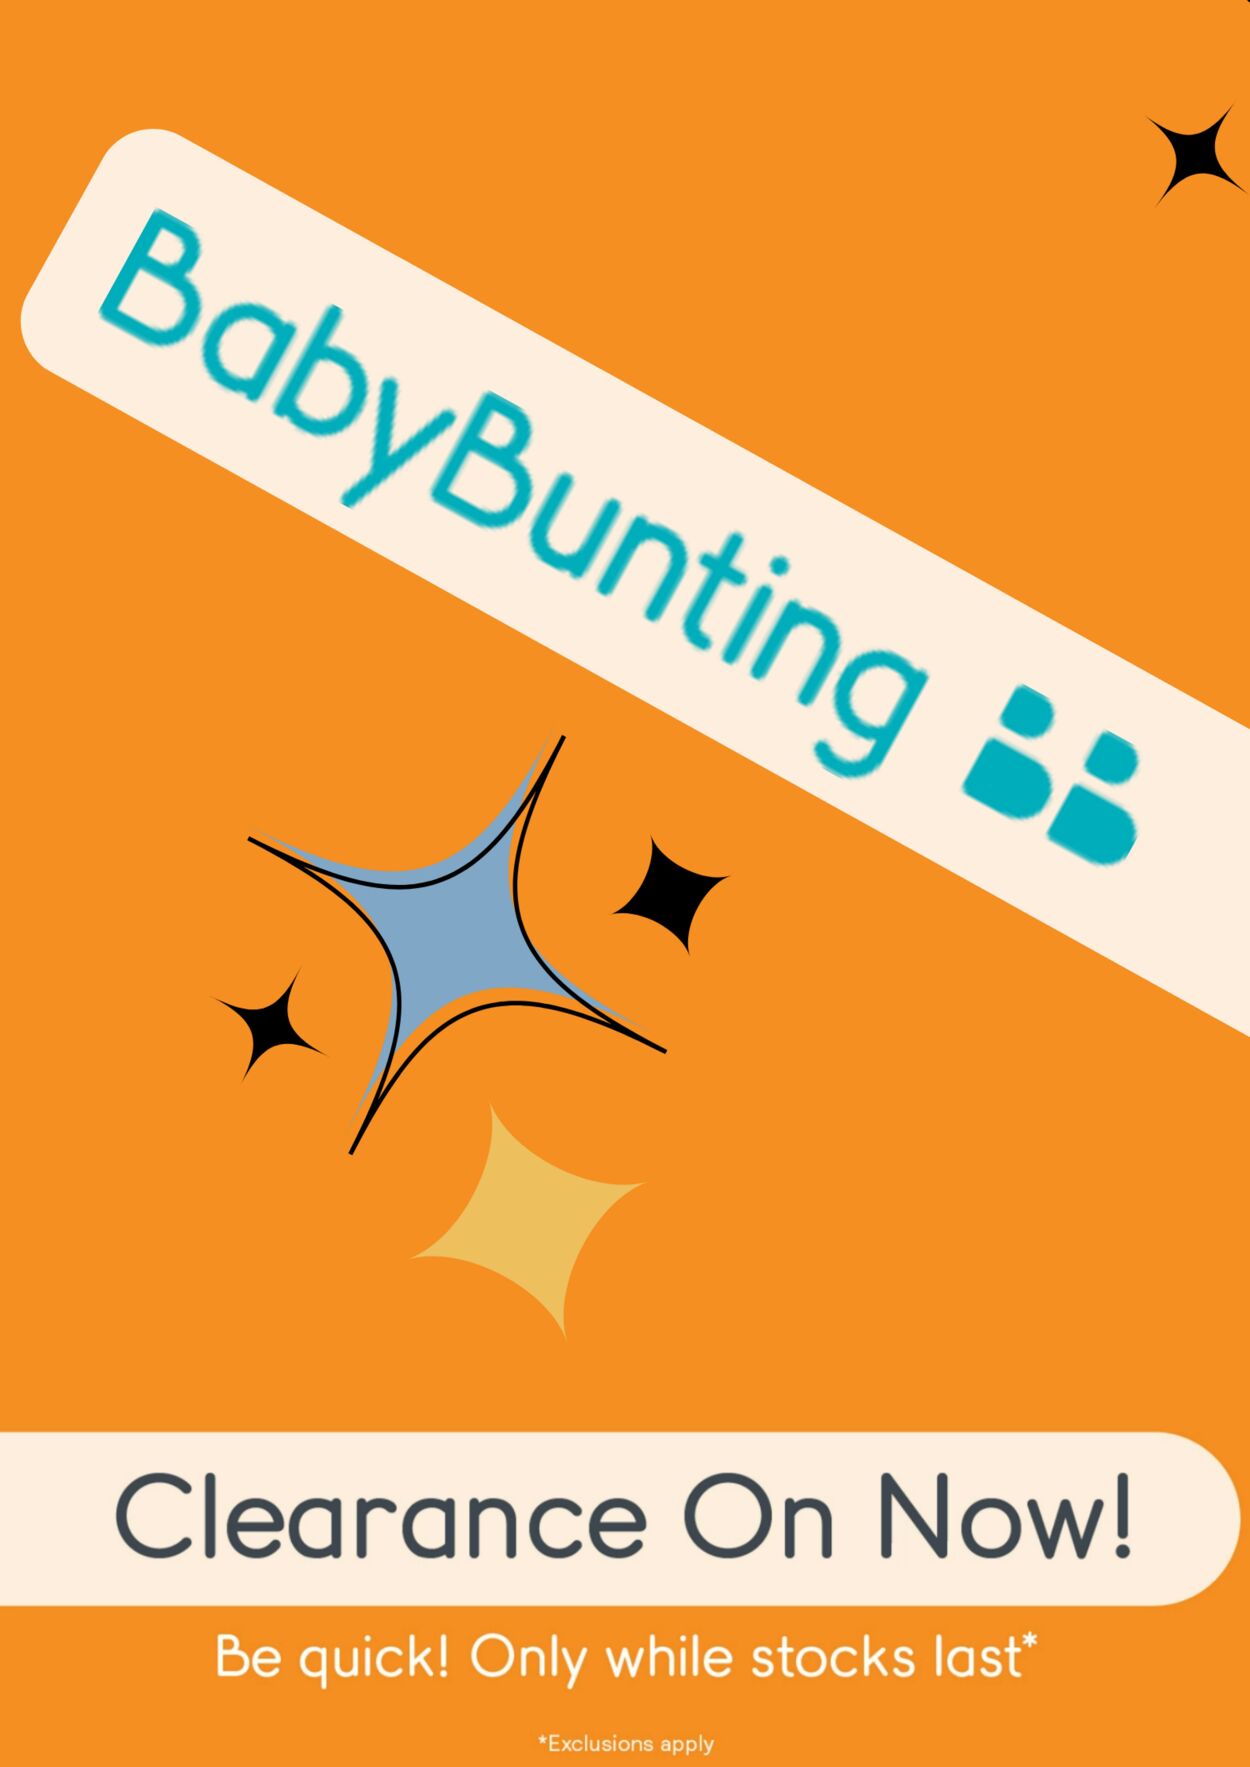 Baby Bunting Promotional catalogues